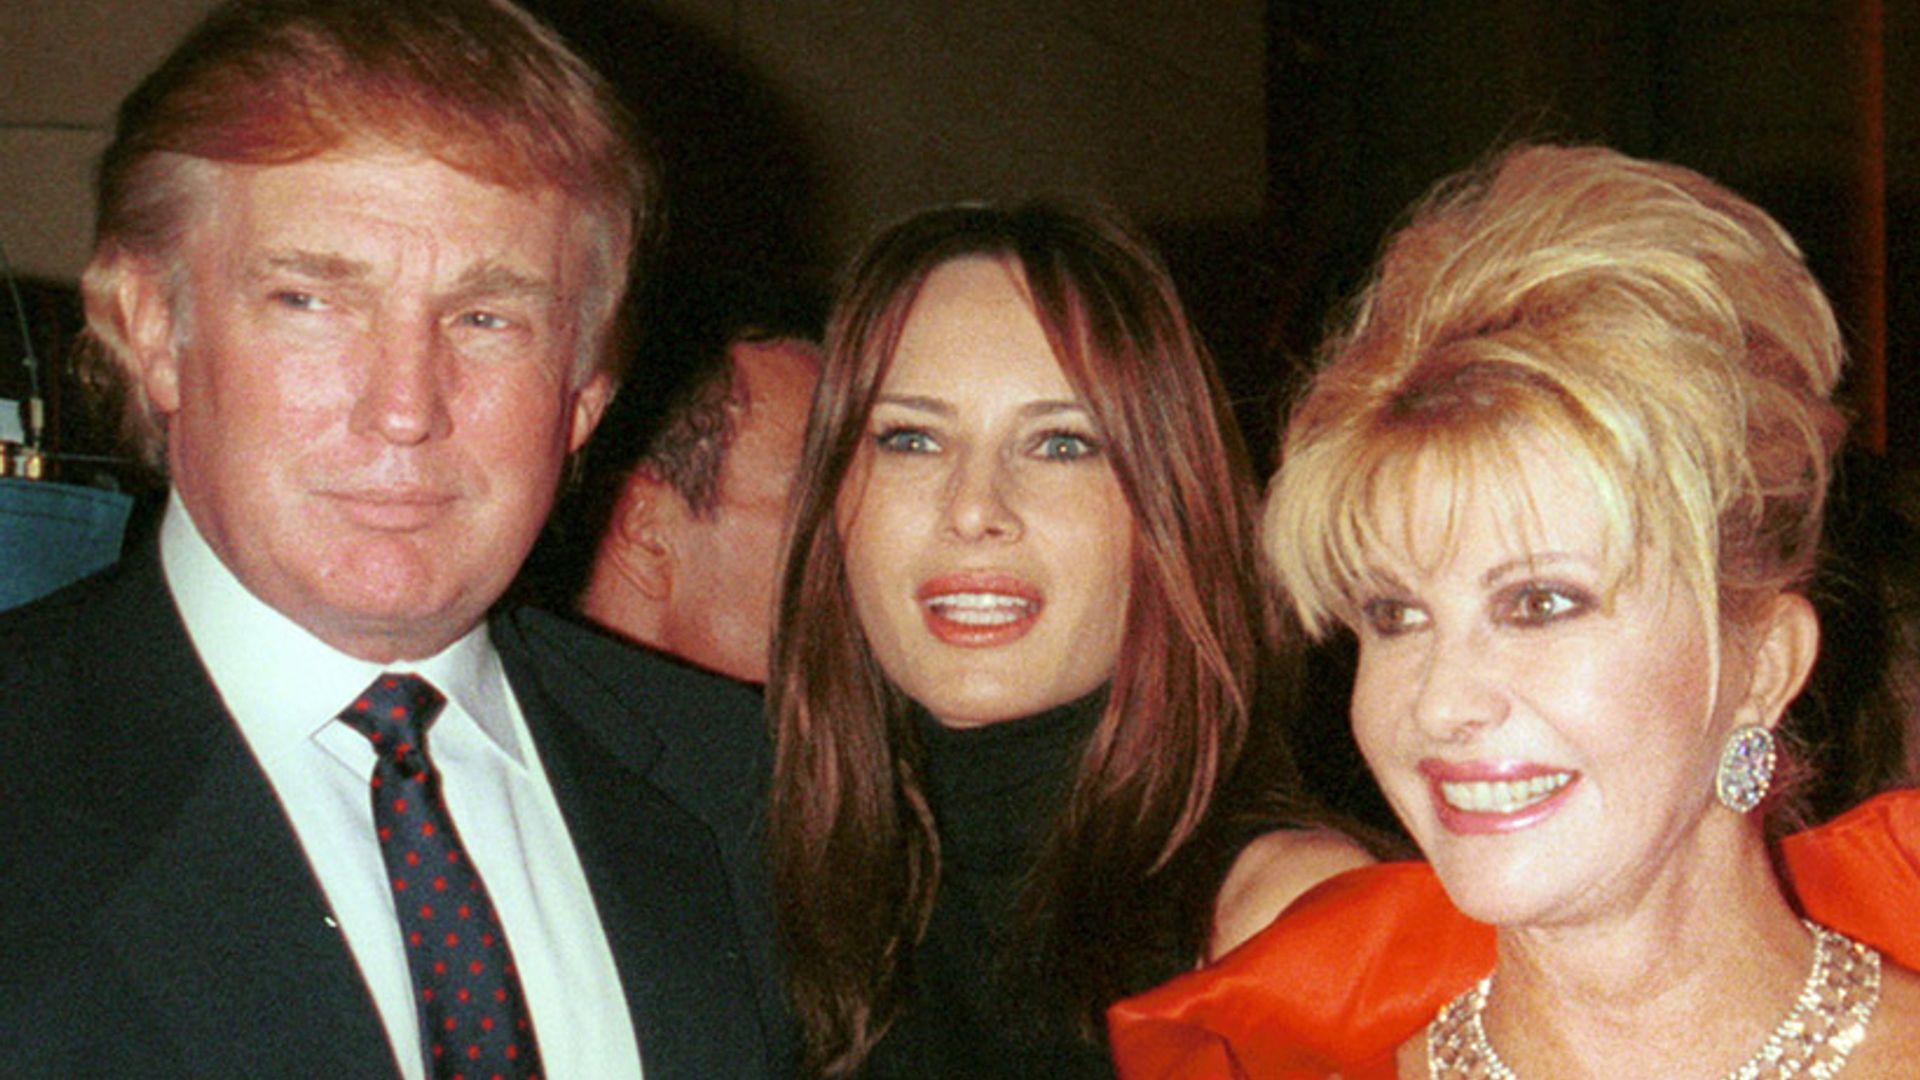 Ivana Trump opens up about relationship with Melania Trump